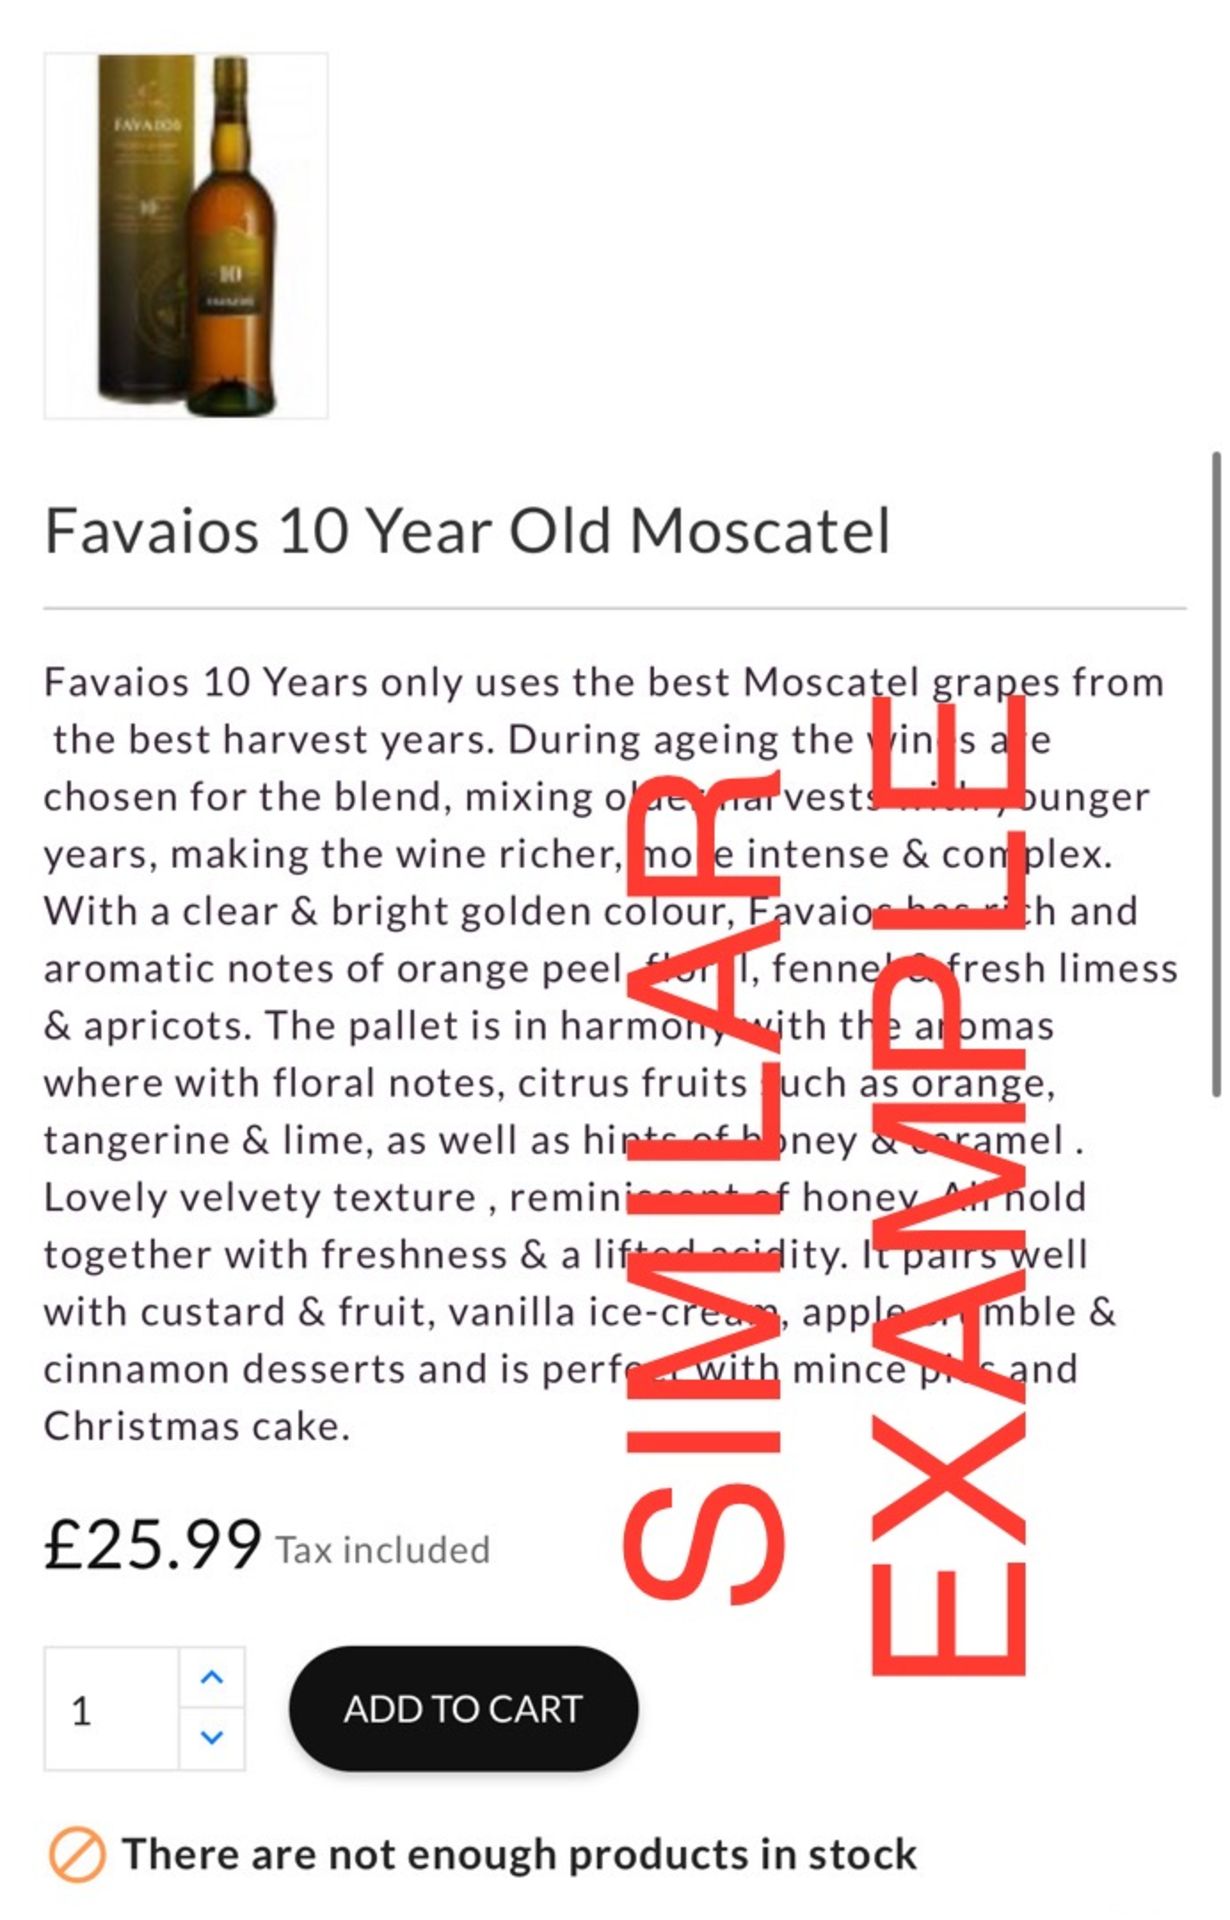 Favaios 10 Year Old Moscatel - New in Box - Image 3 of 3